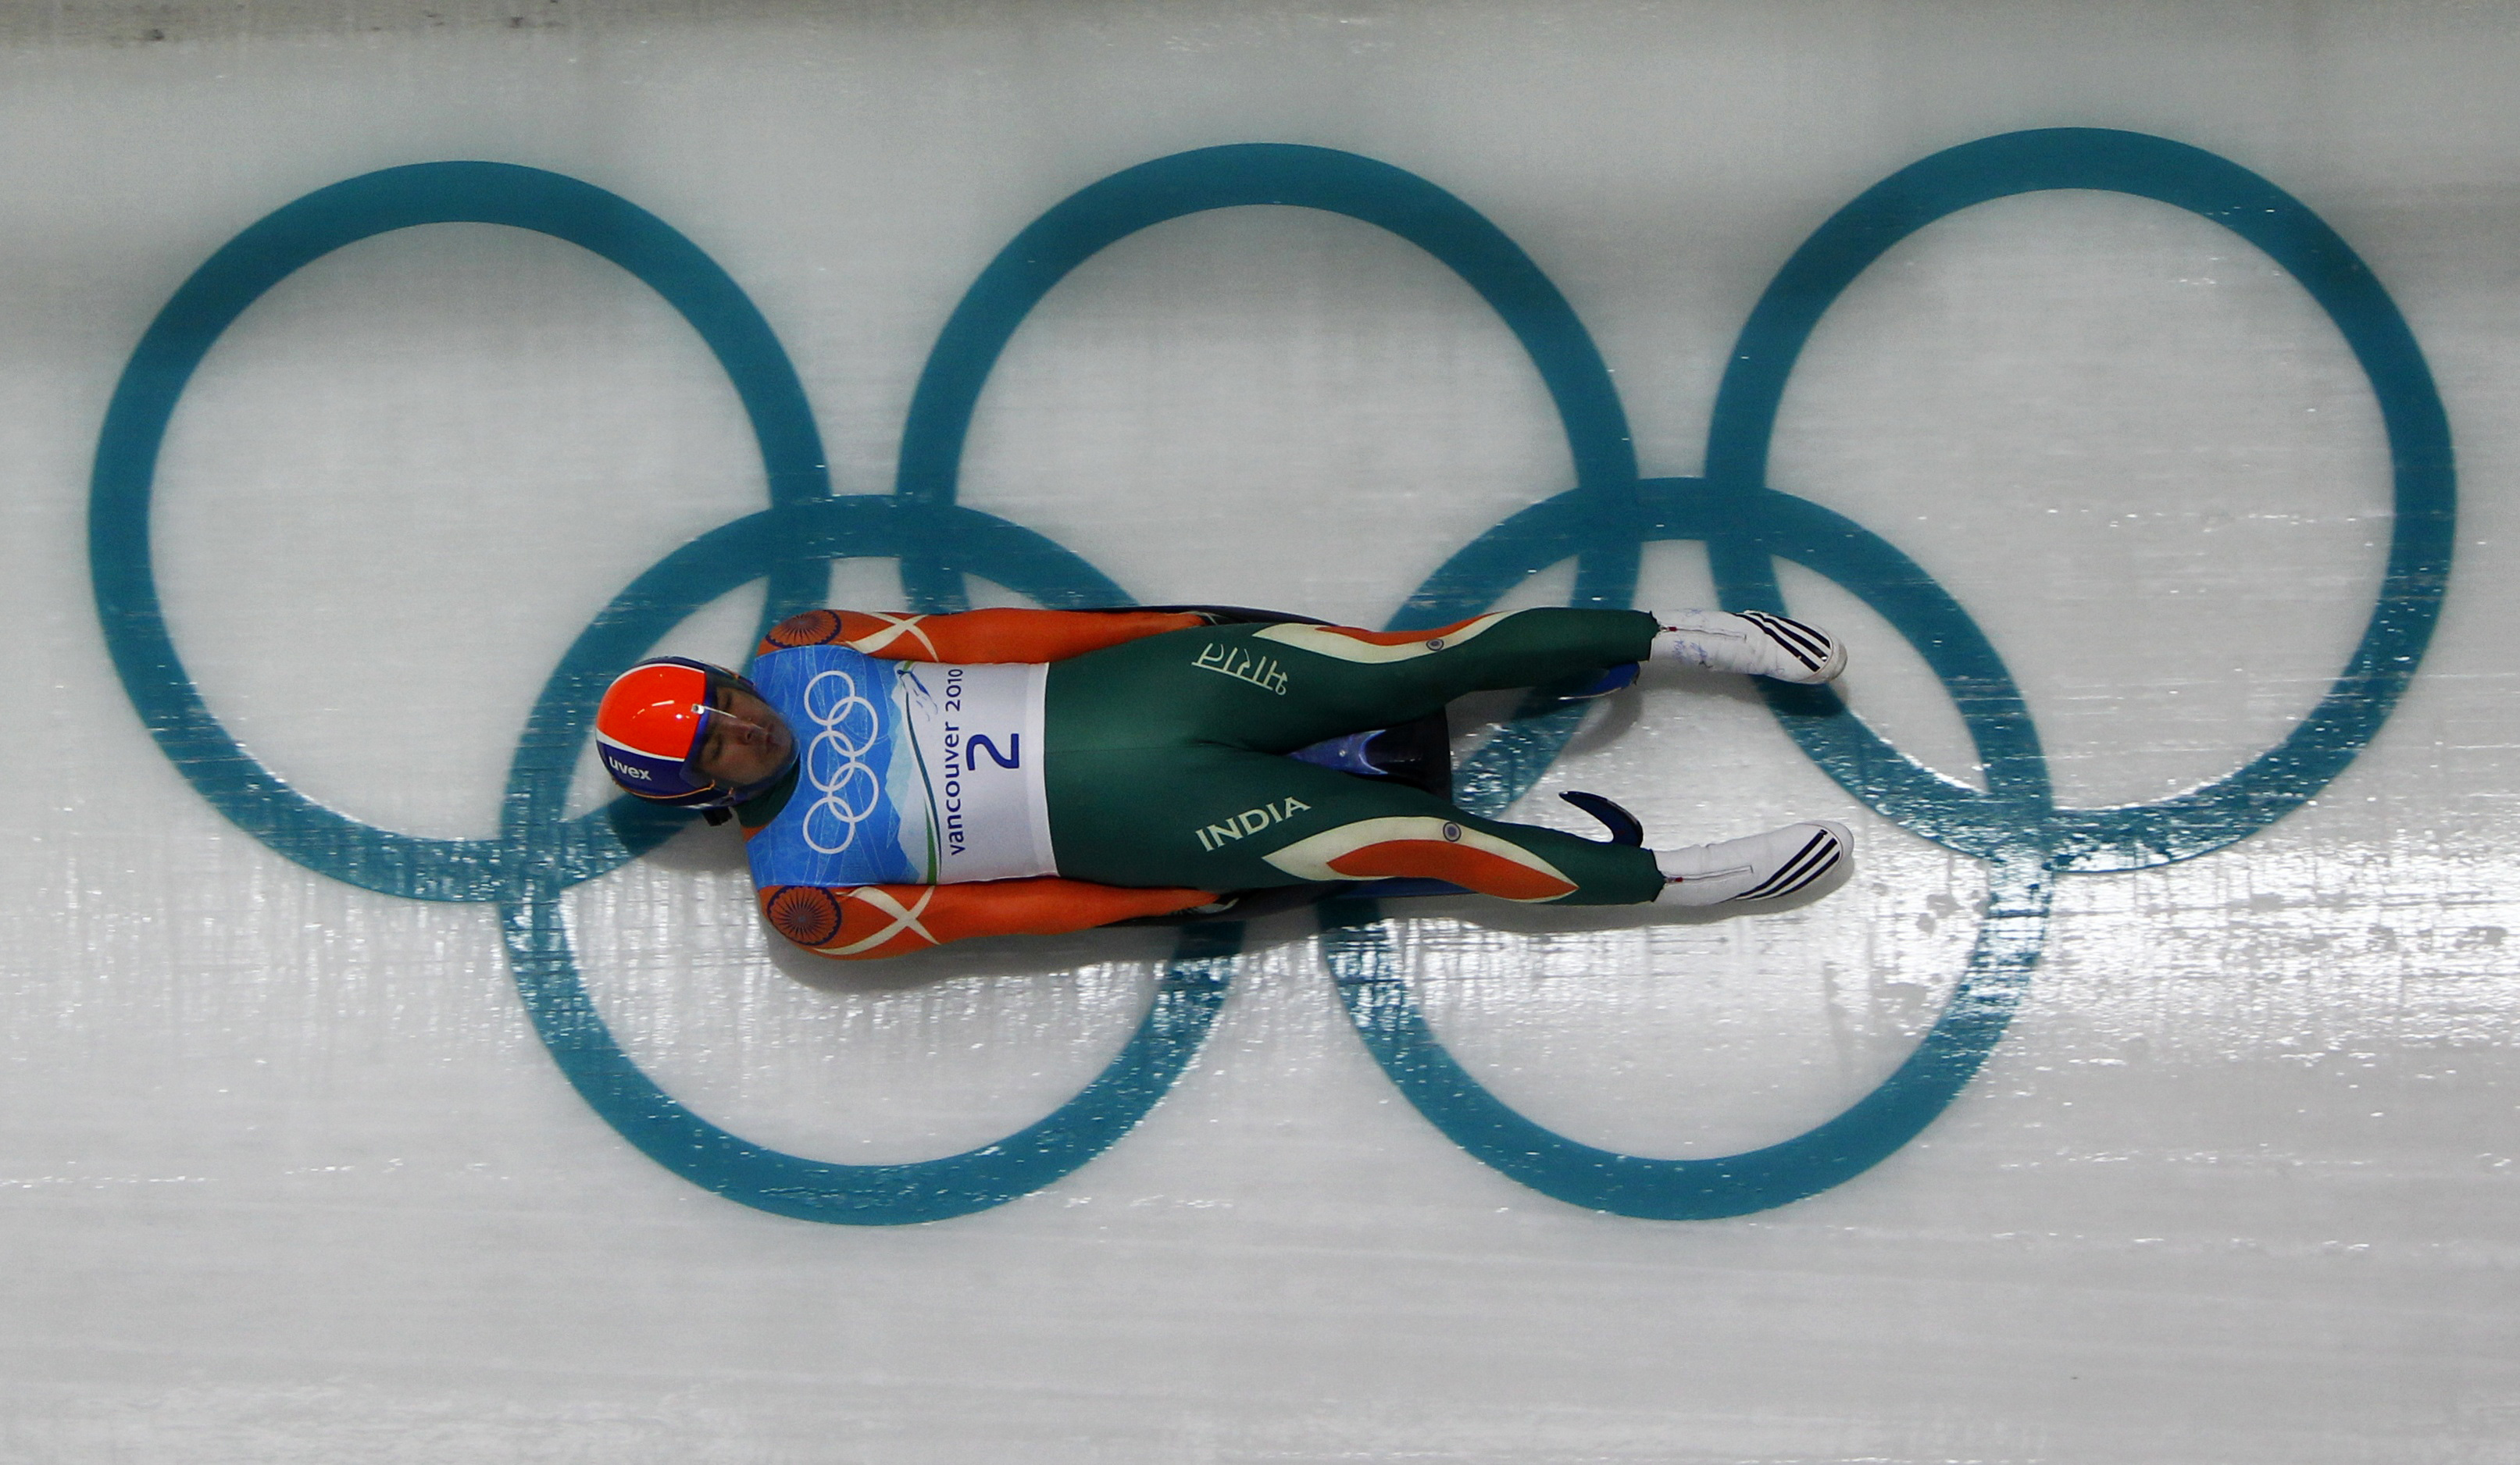 India's K.P. Keshavan speeds down the track during a training run for the men's singles luge in preparation for the Vancouver 2010 Winter Olympics in Whistler